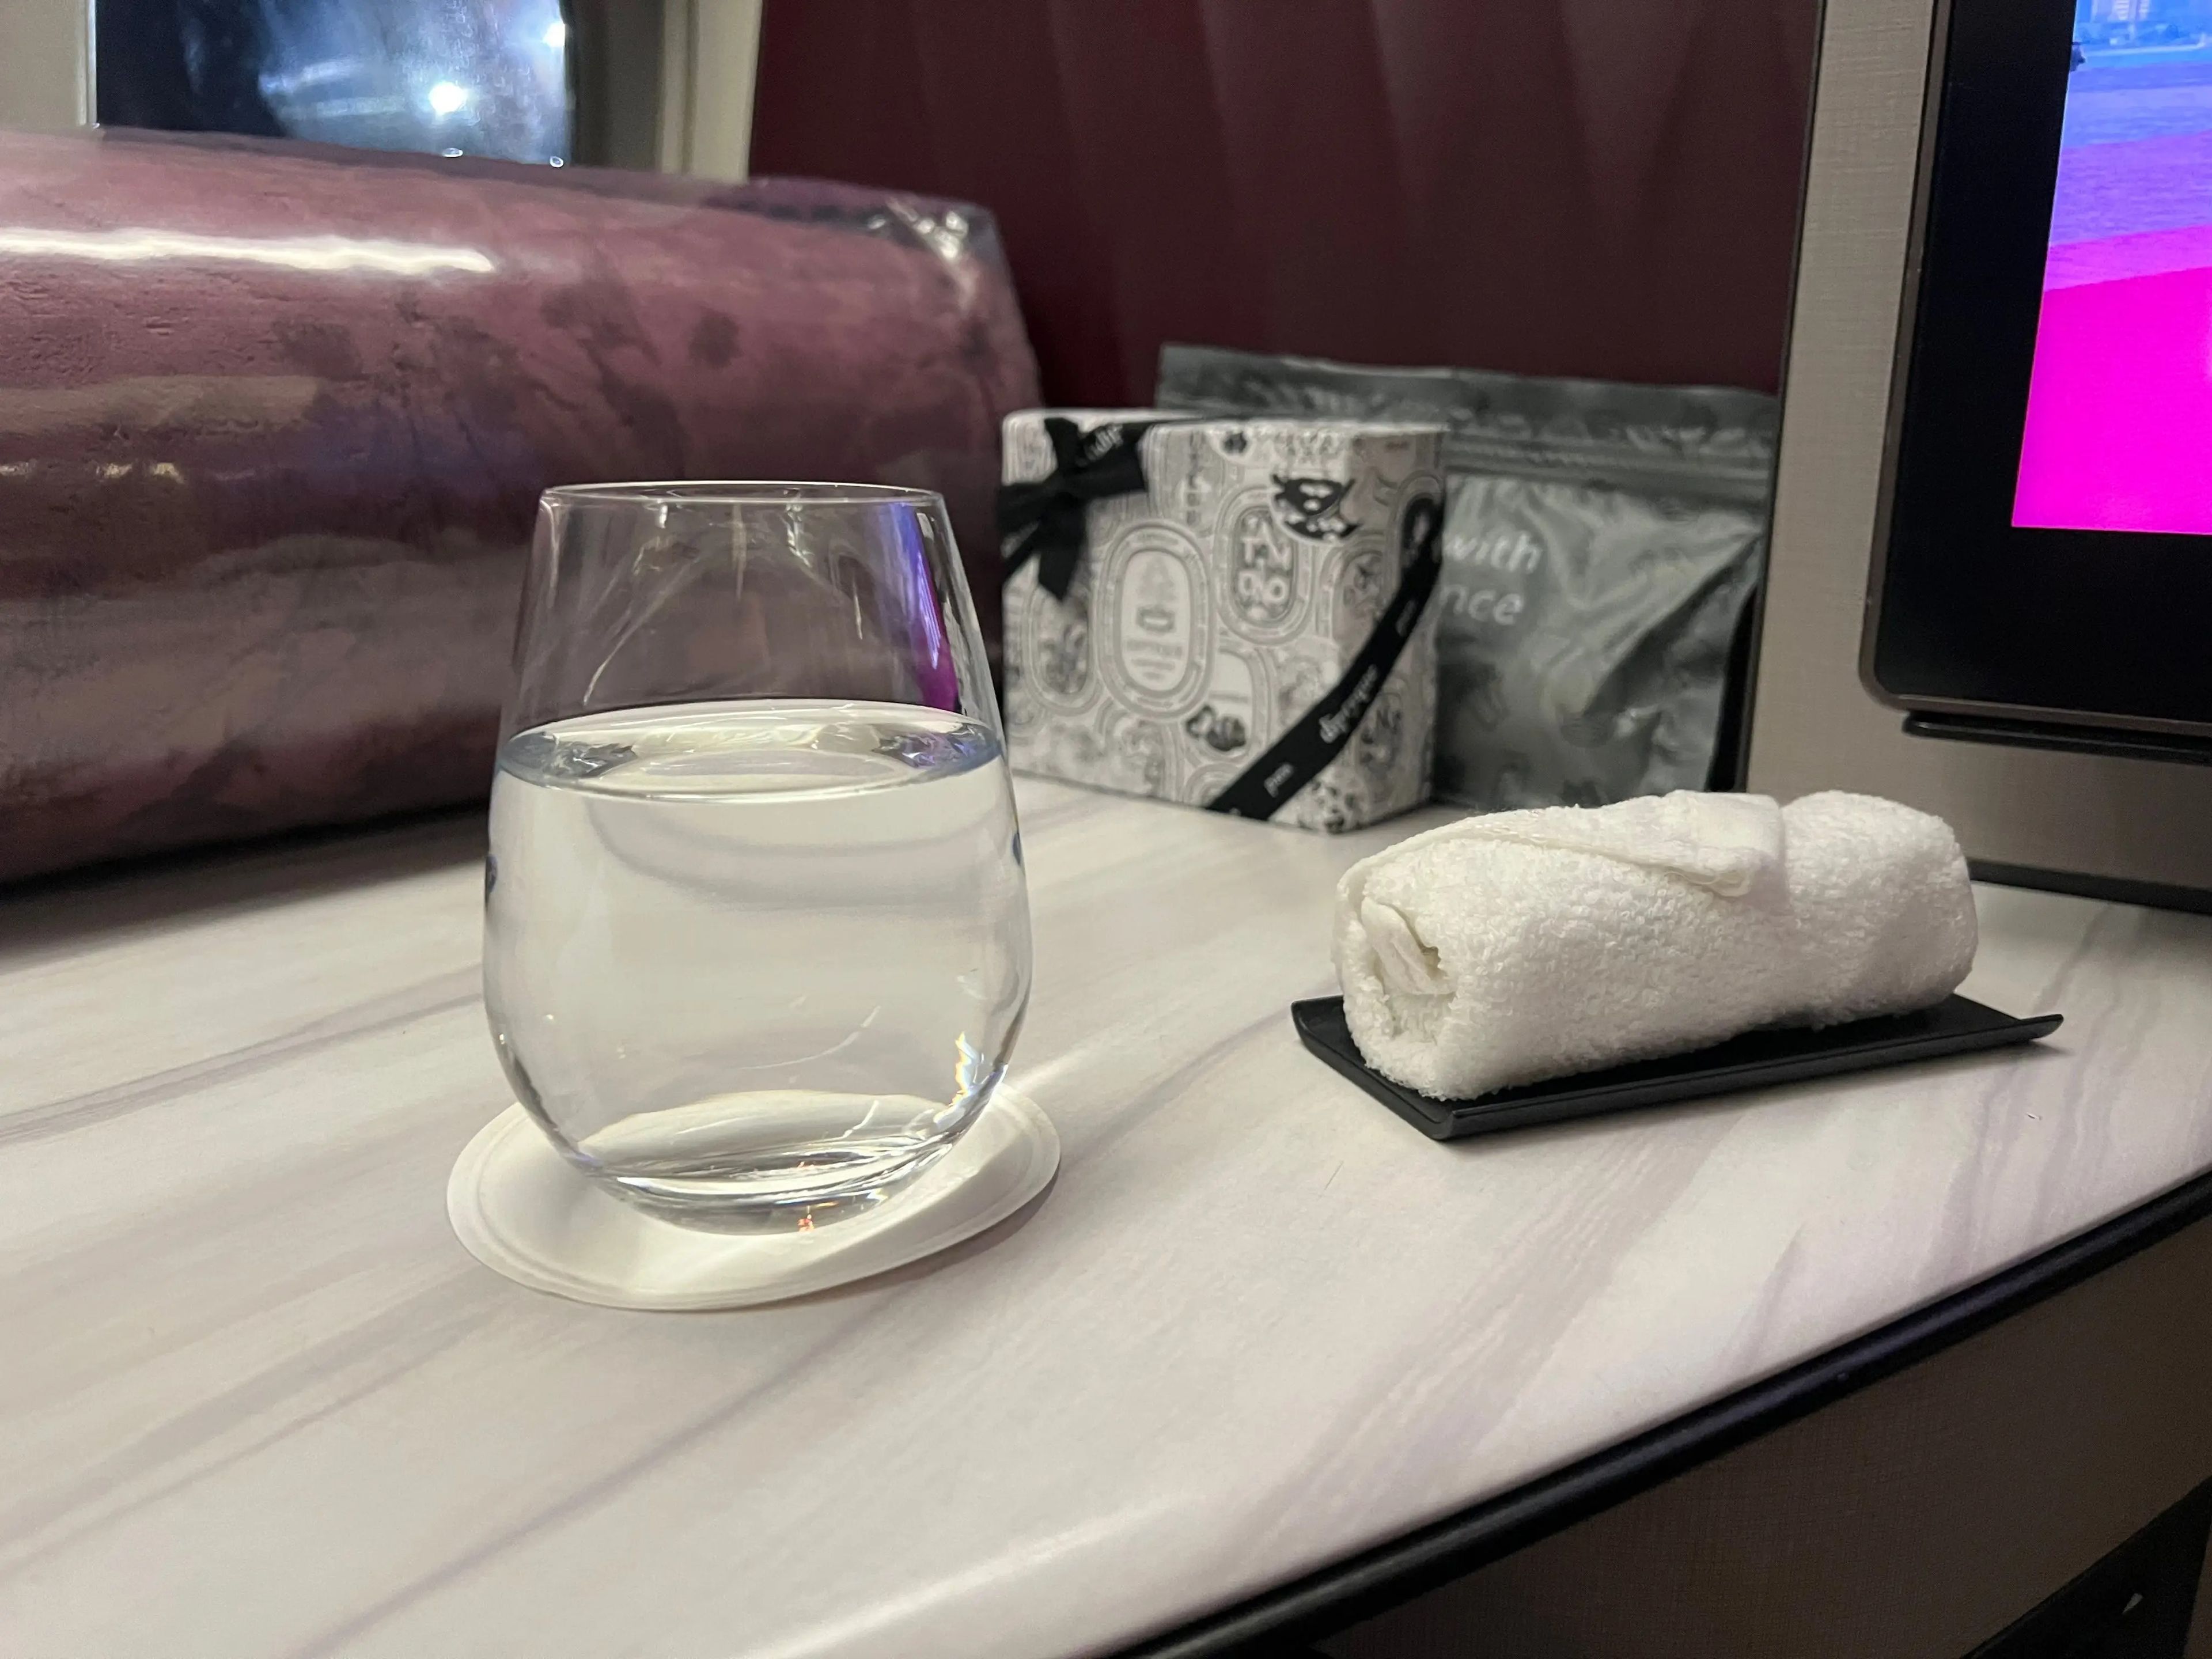 A beverage and warm toilette were given before taking off.